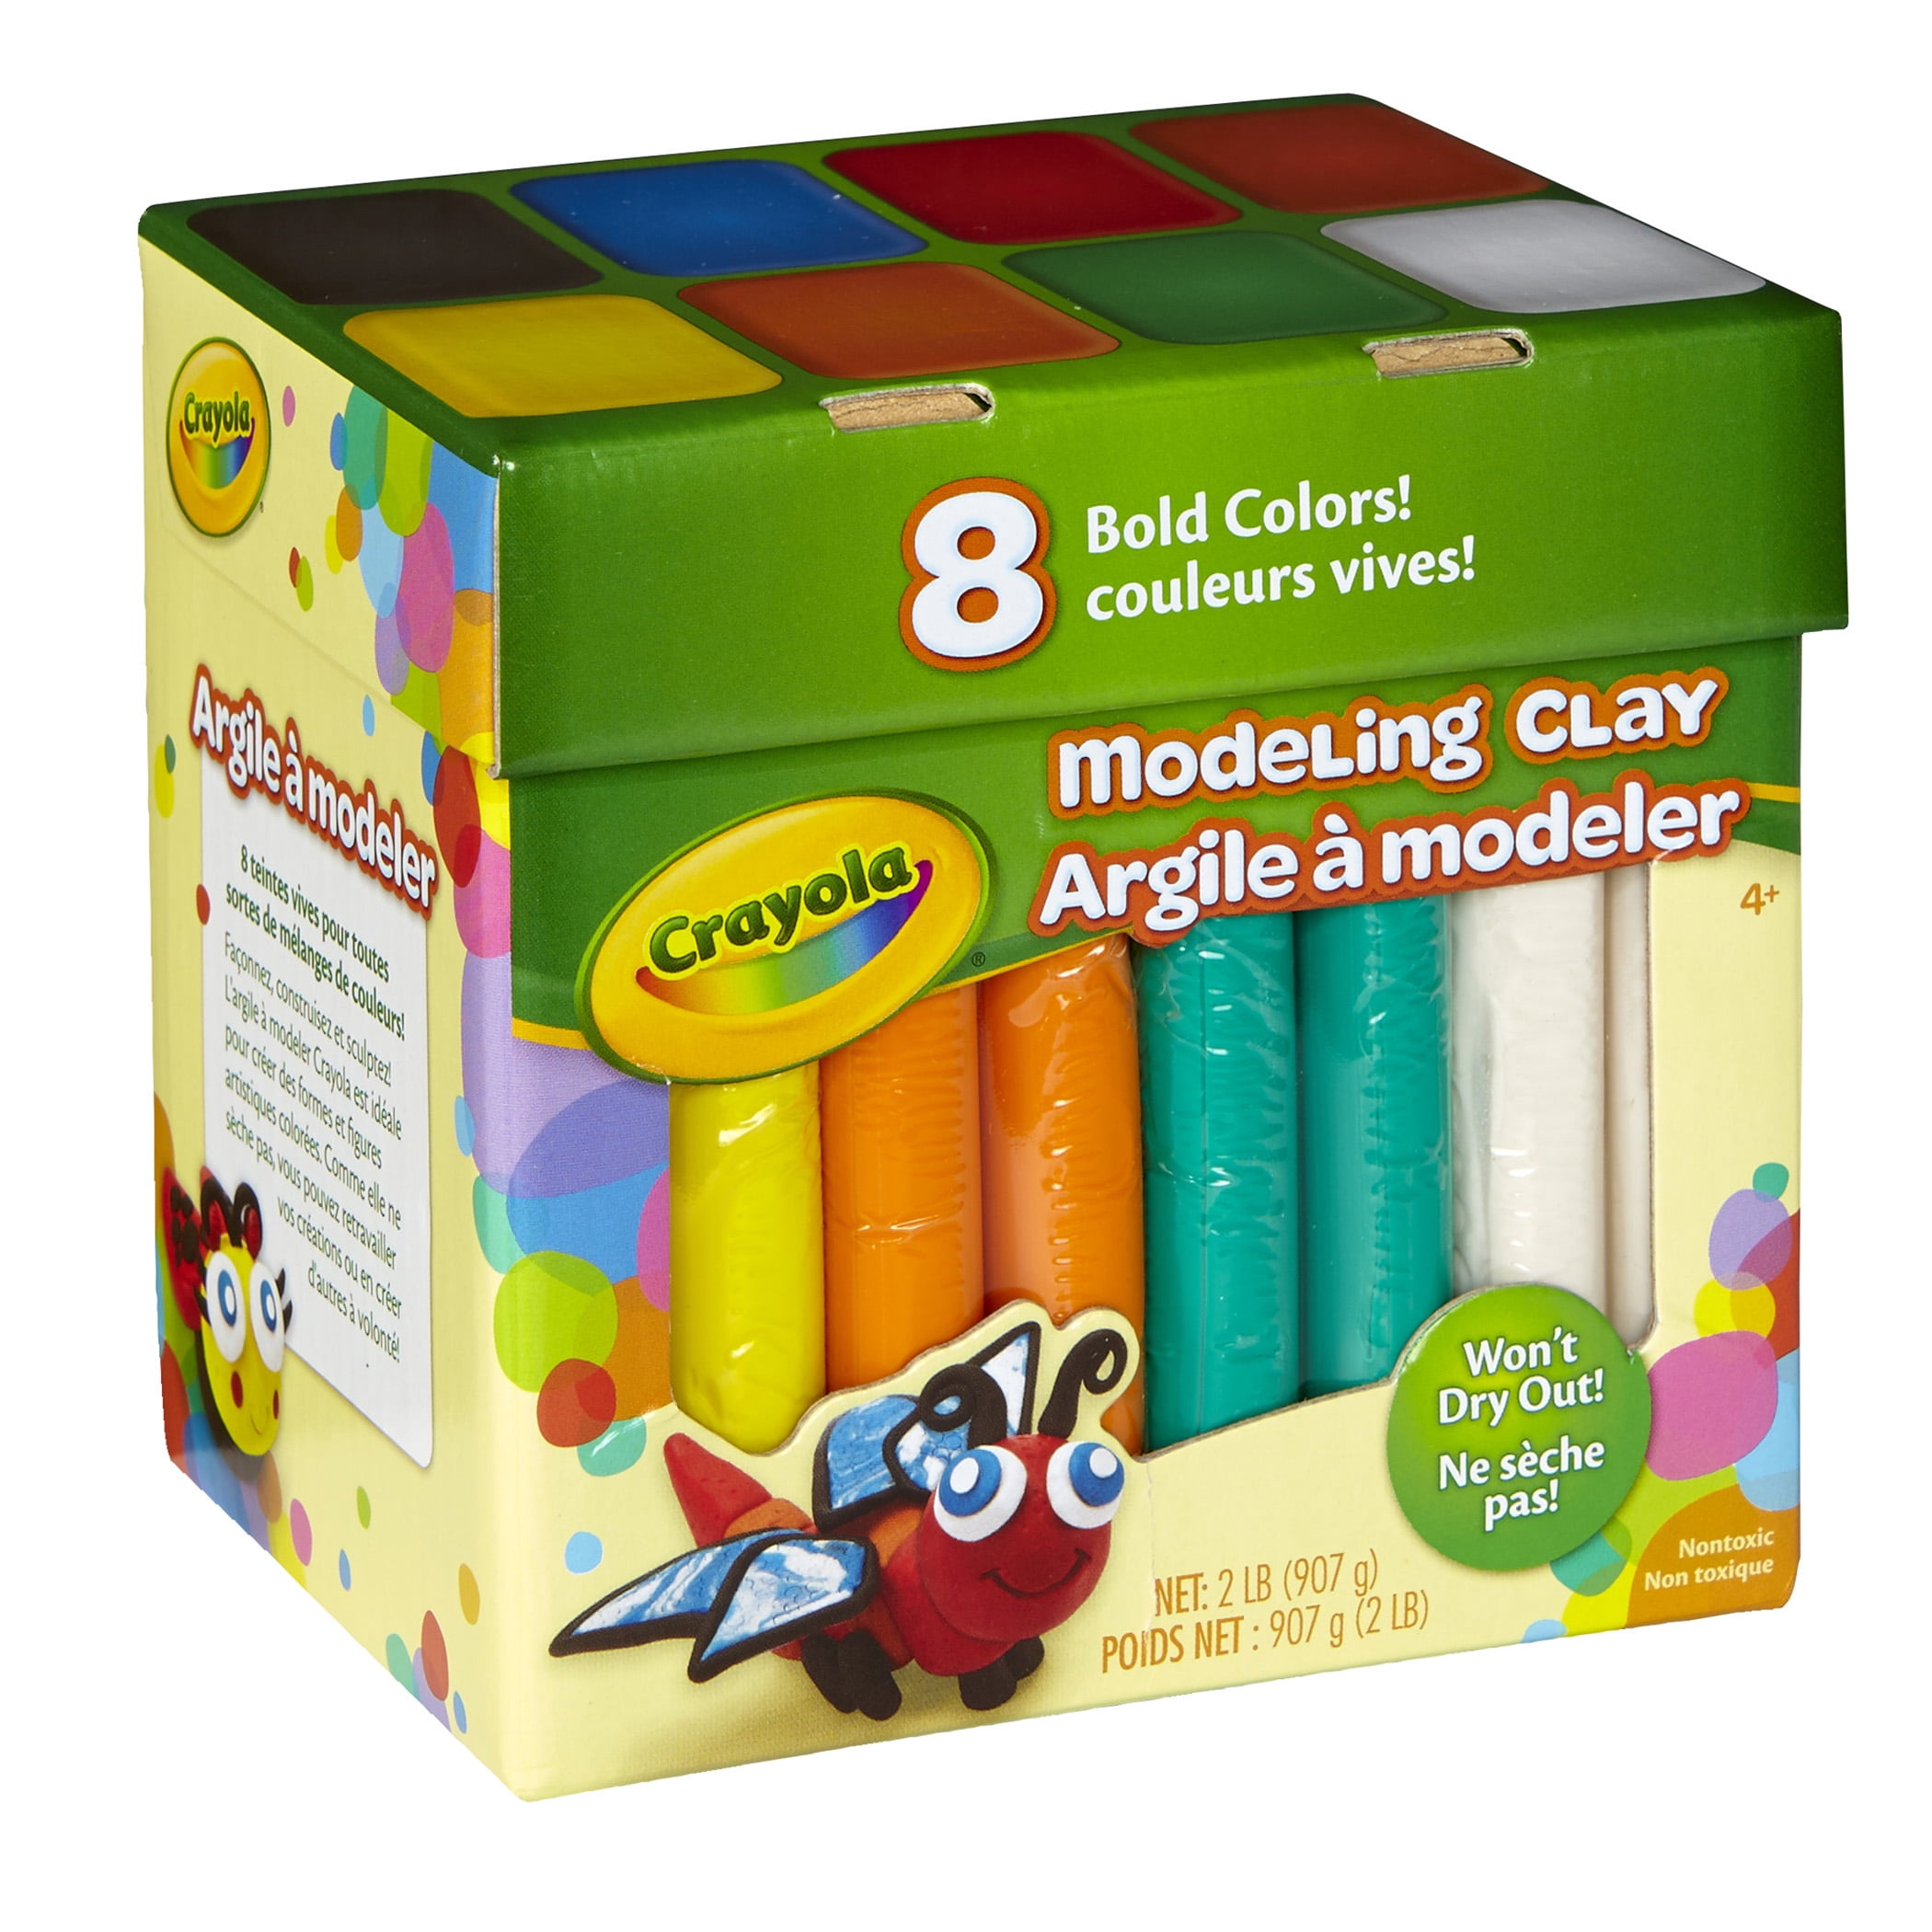 Crayola Modeling Clay, 2 Pounds, Bold Colors, Set of 8